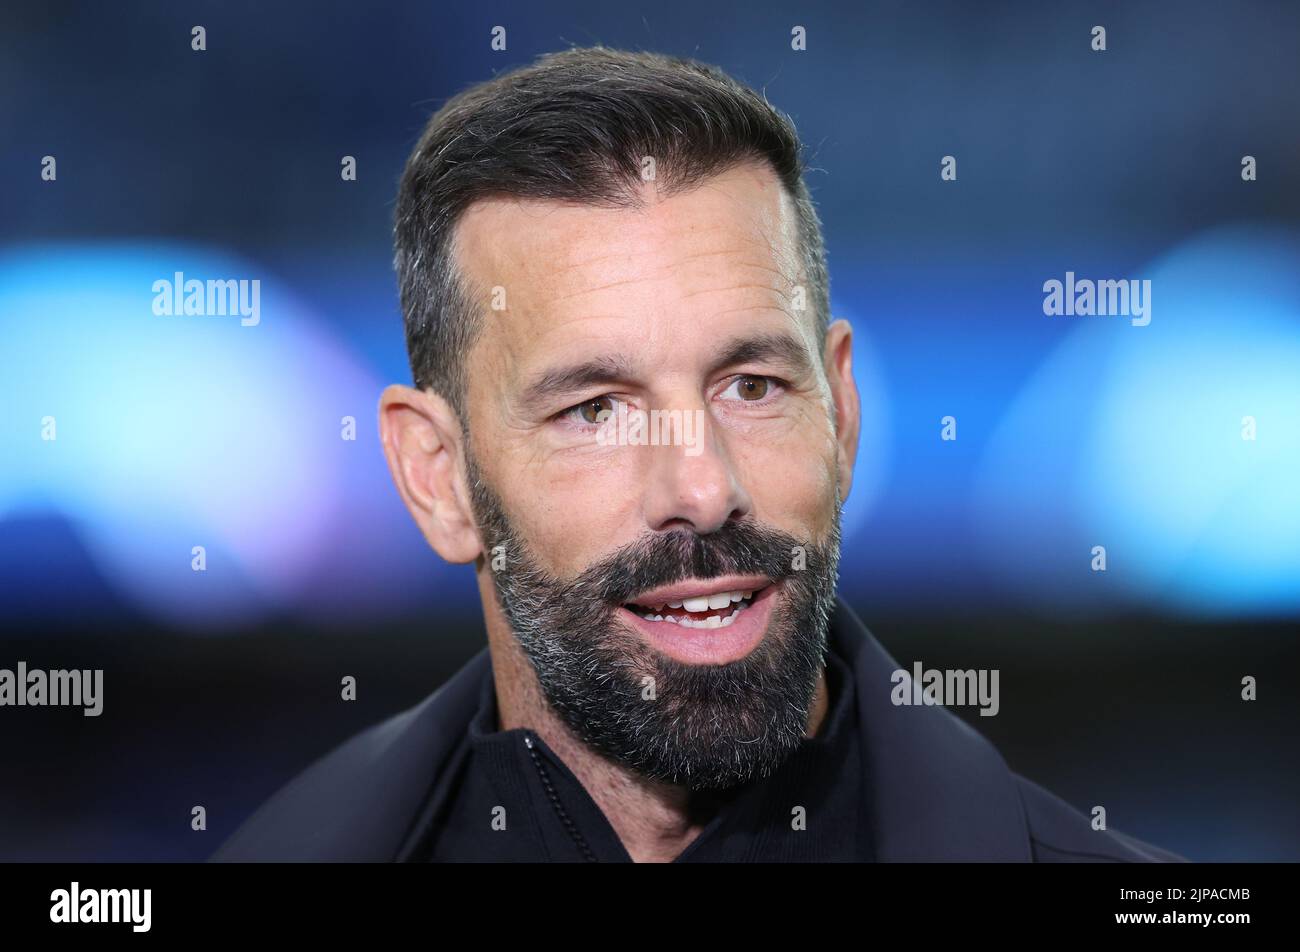 PSV Eindhoven manager Ruud van Nistelrooy interviewed before the Champions League qualifying match at Ibrox, Glasgow. Picture date: Tuesday August 16, 2022. Stock Photo